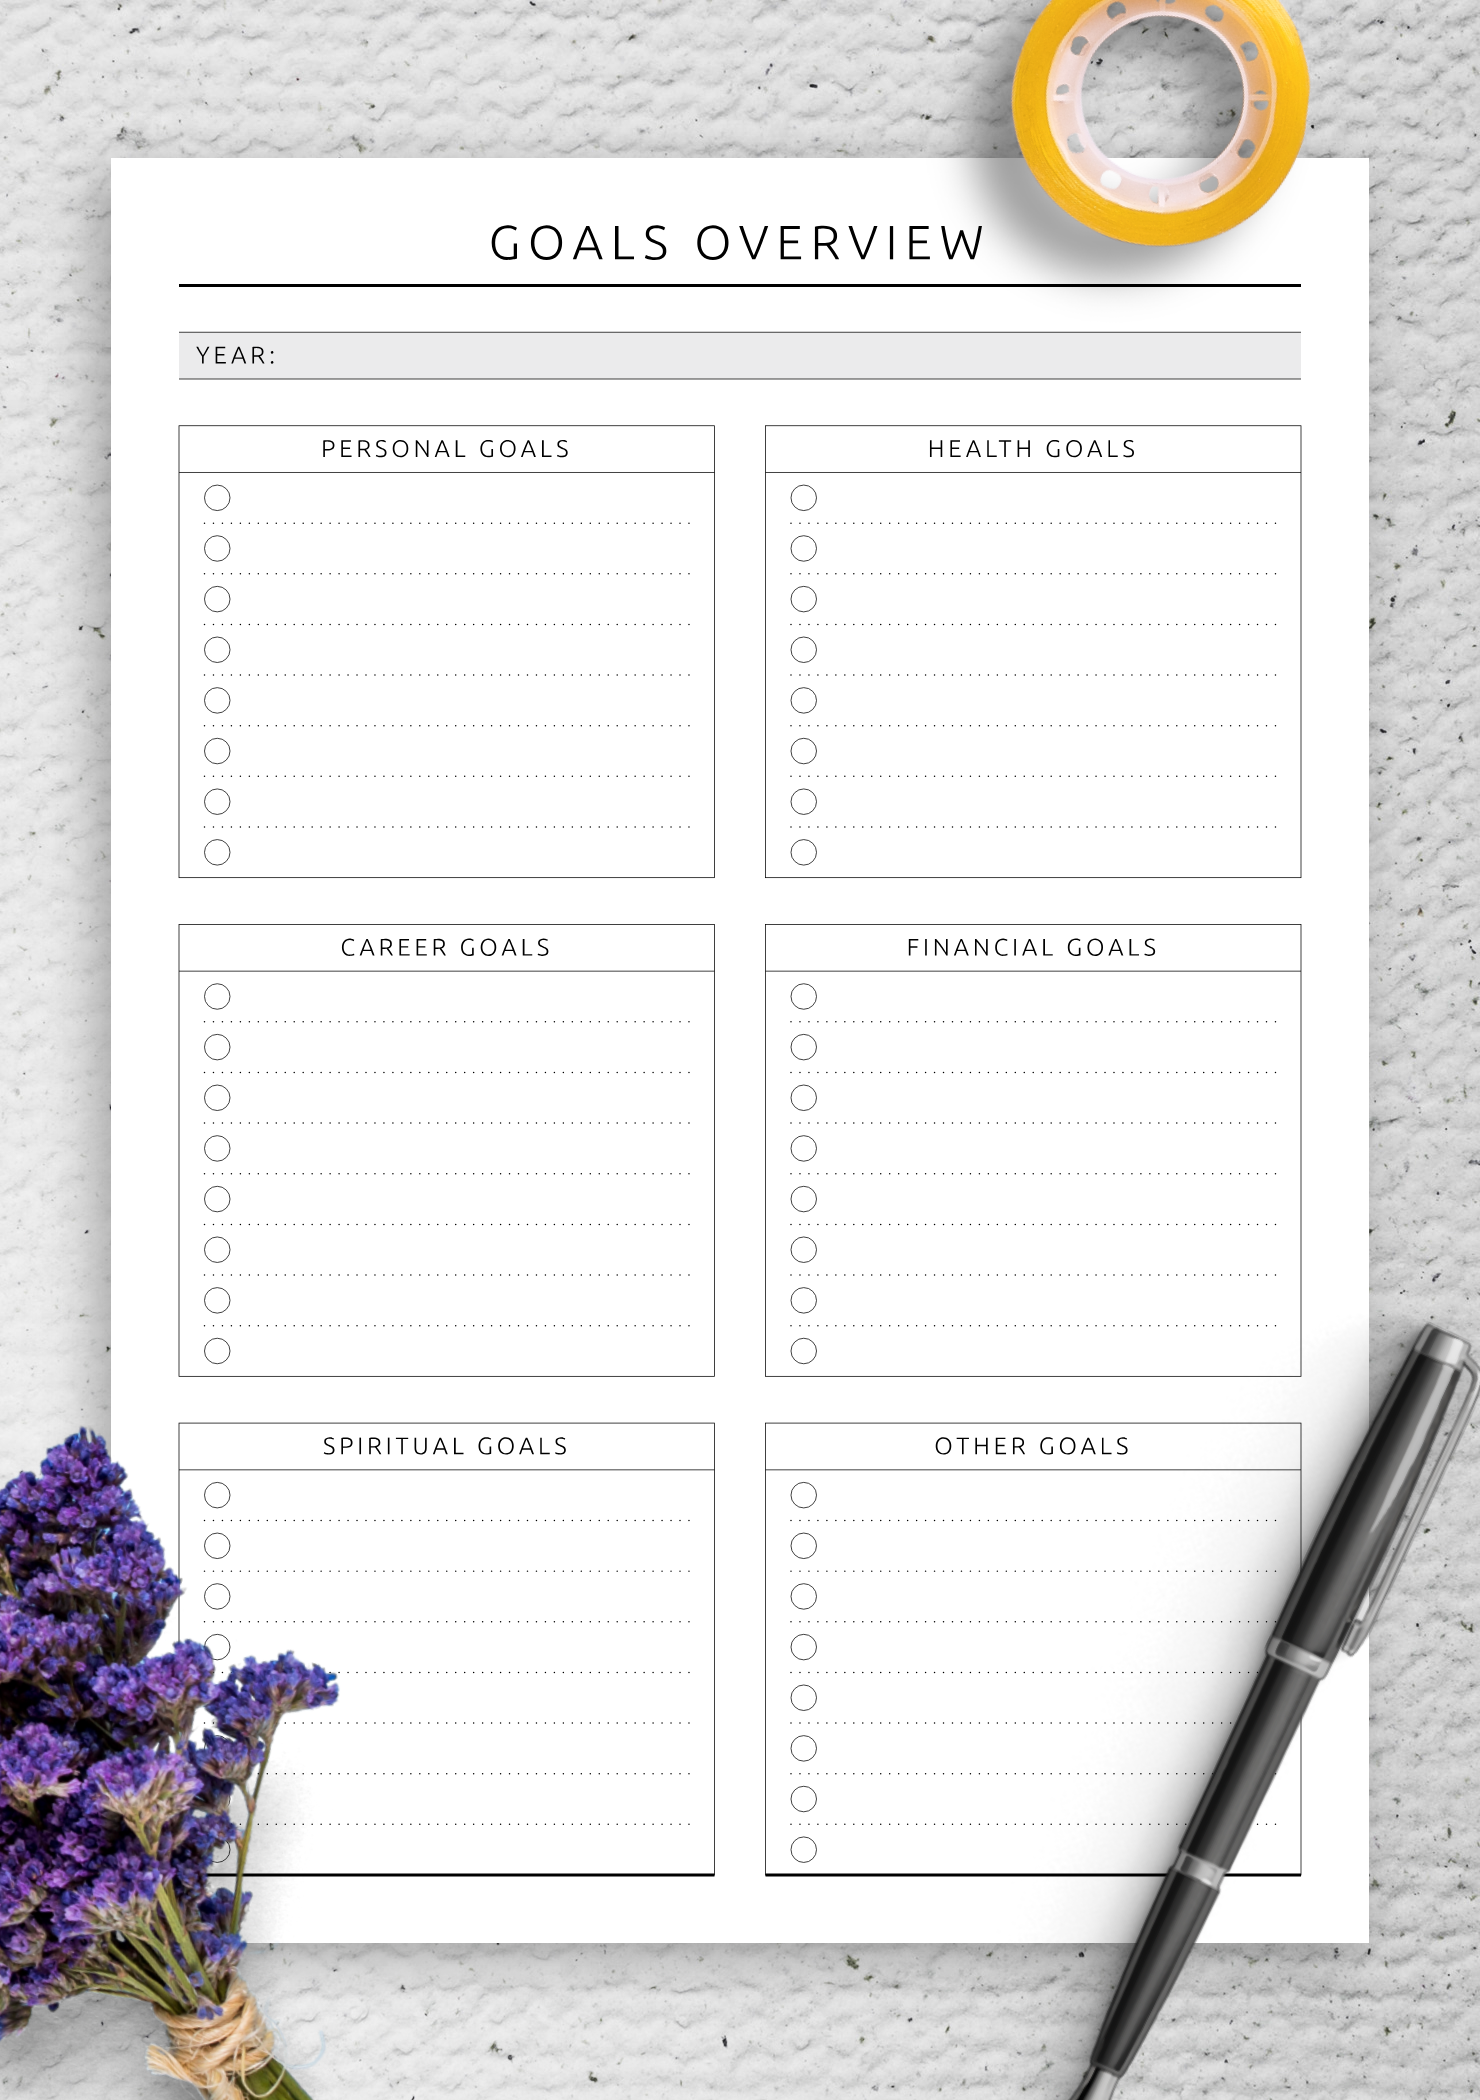 Download Printable Goals Overview - Original Style PDF